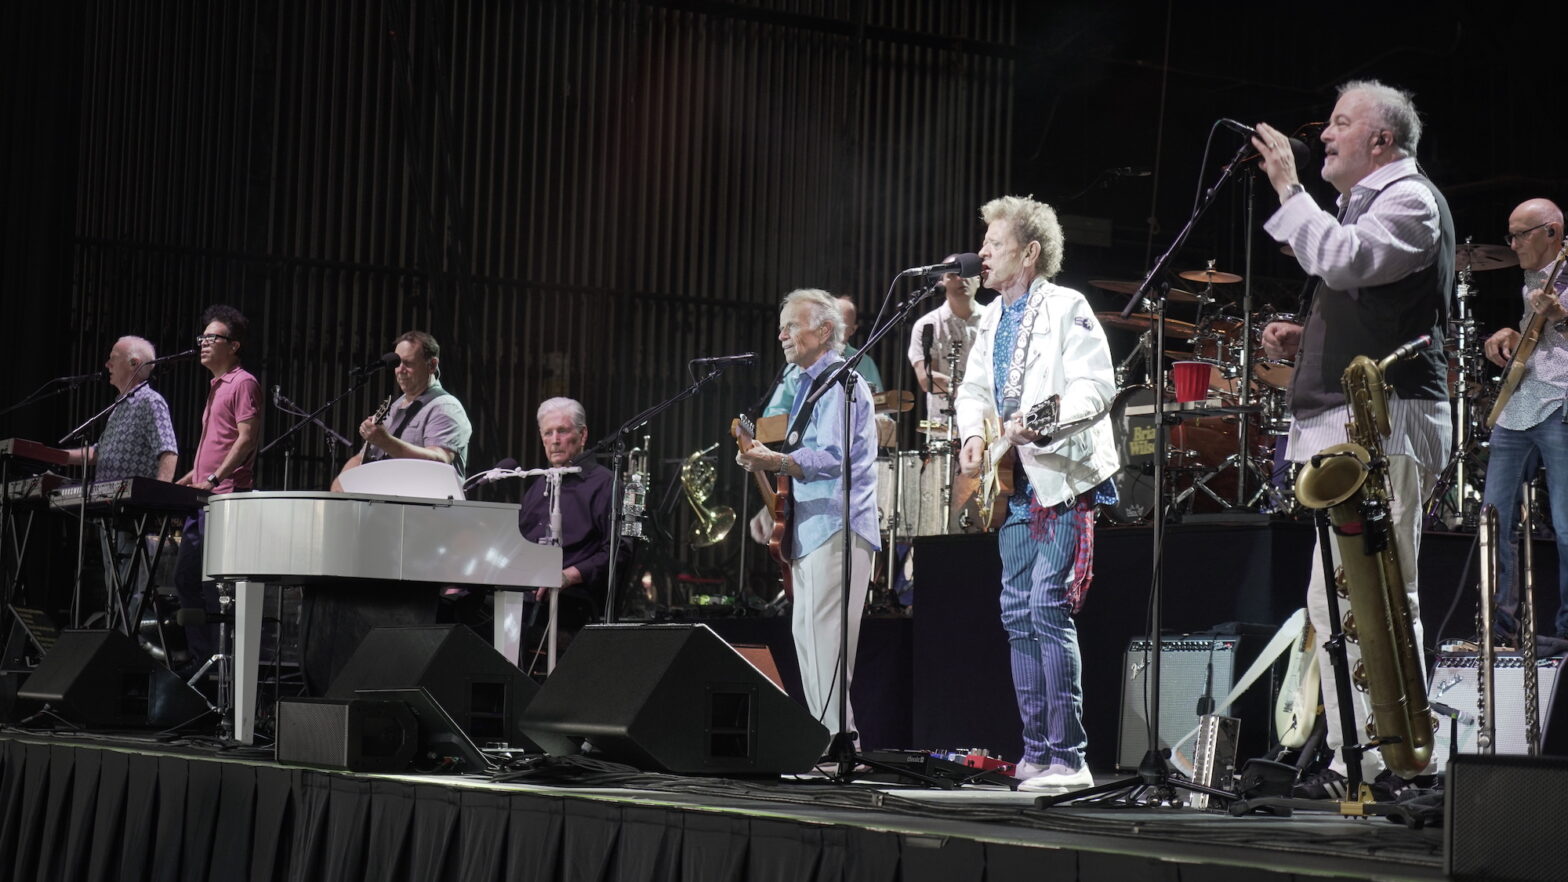 Brian Wilson sitting at a piano onstage on a stage with Al Jardine and Blondie Chaplin, who are singing.